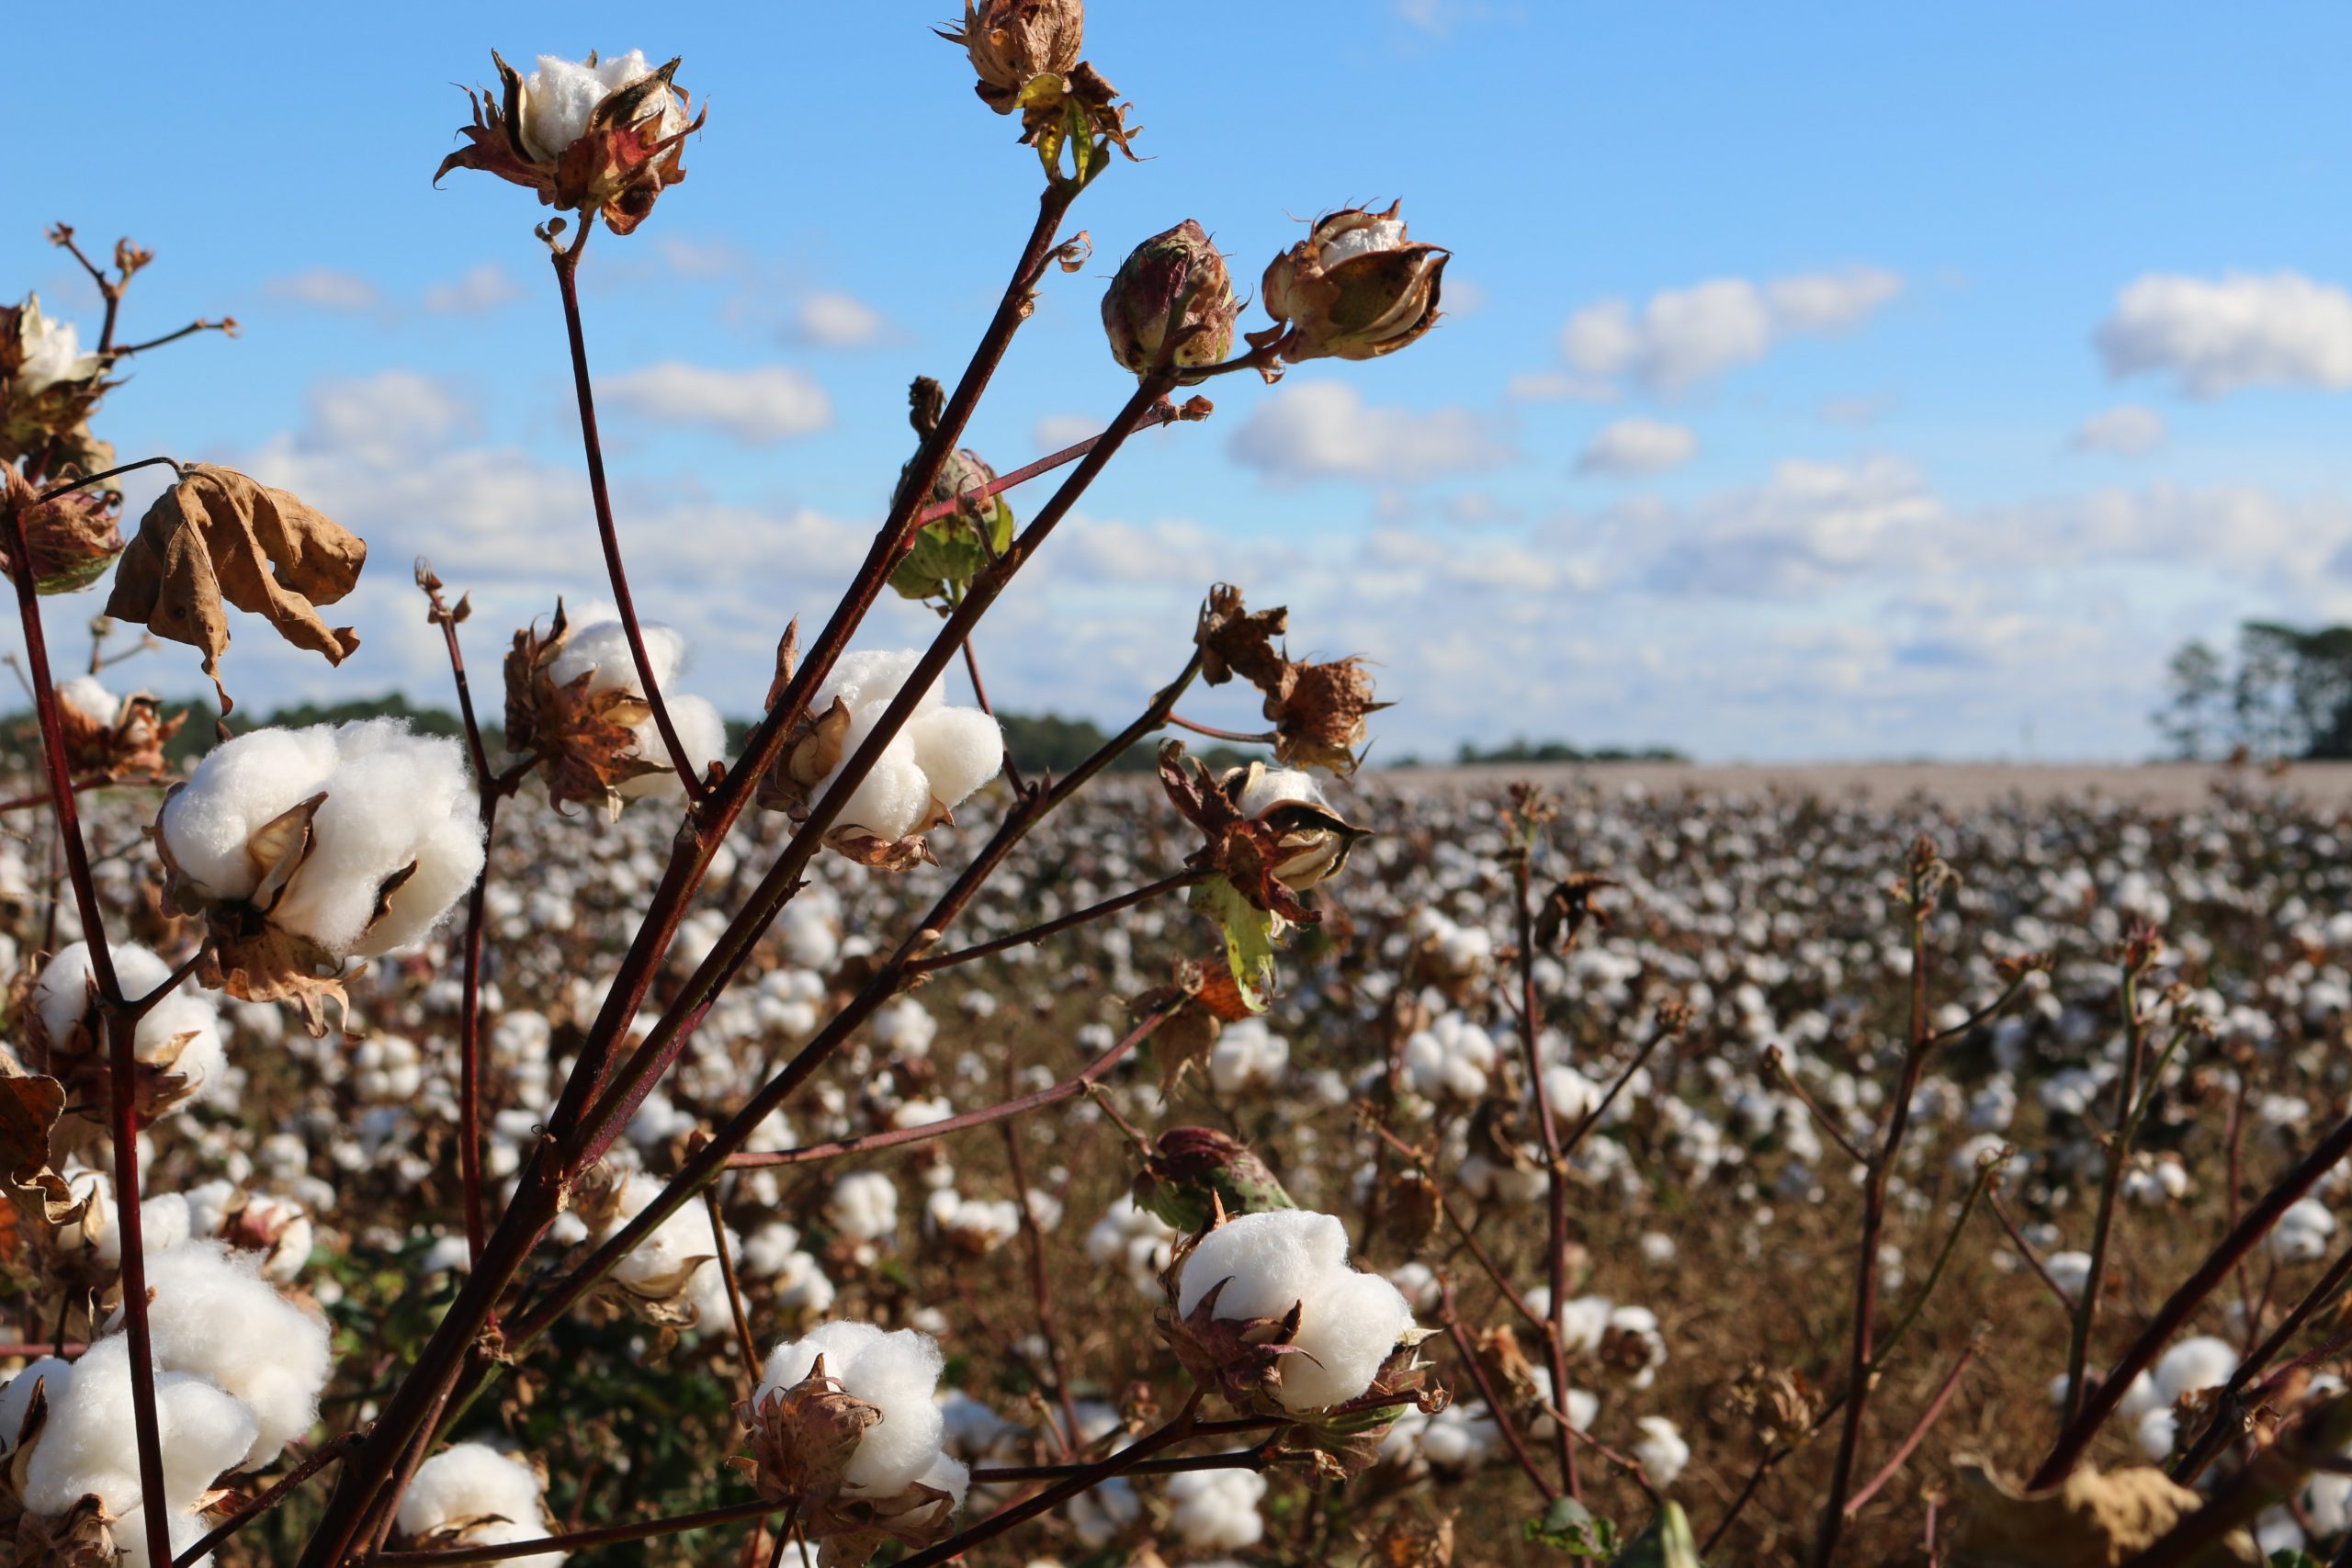 COTTON FARMERS ANXIOUS ABOUT F...